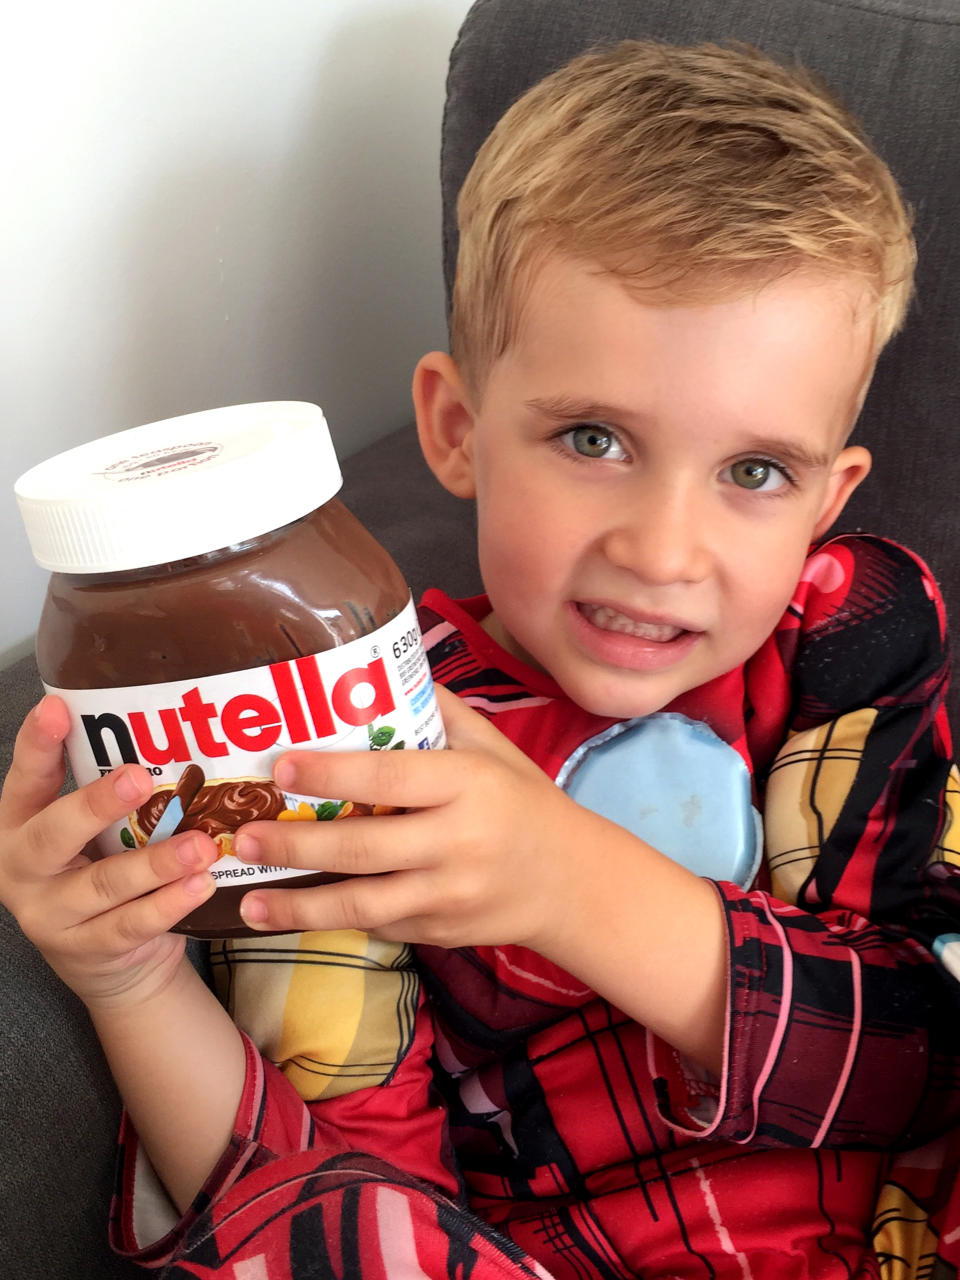 3-year-old Harrison had found the jar of Nutella on a low shelf in the kitchen. Source: Caters News